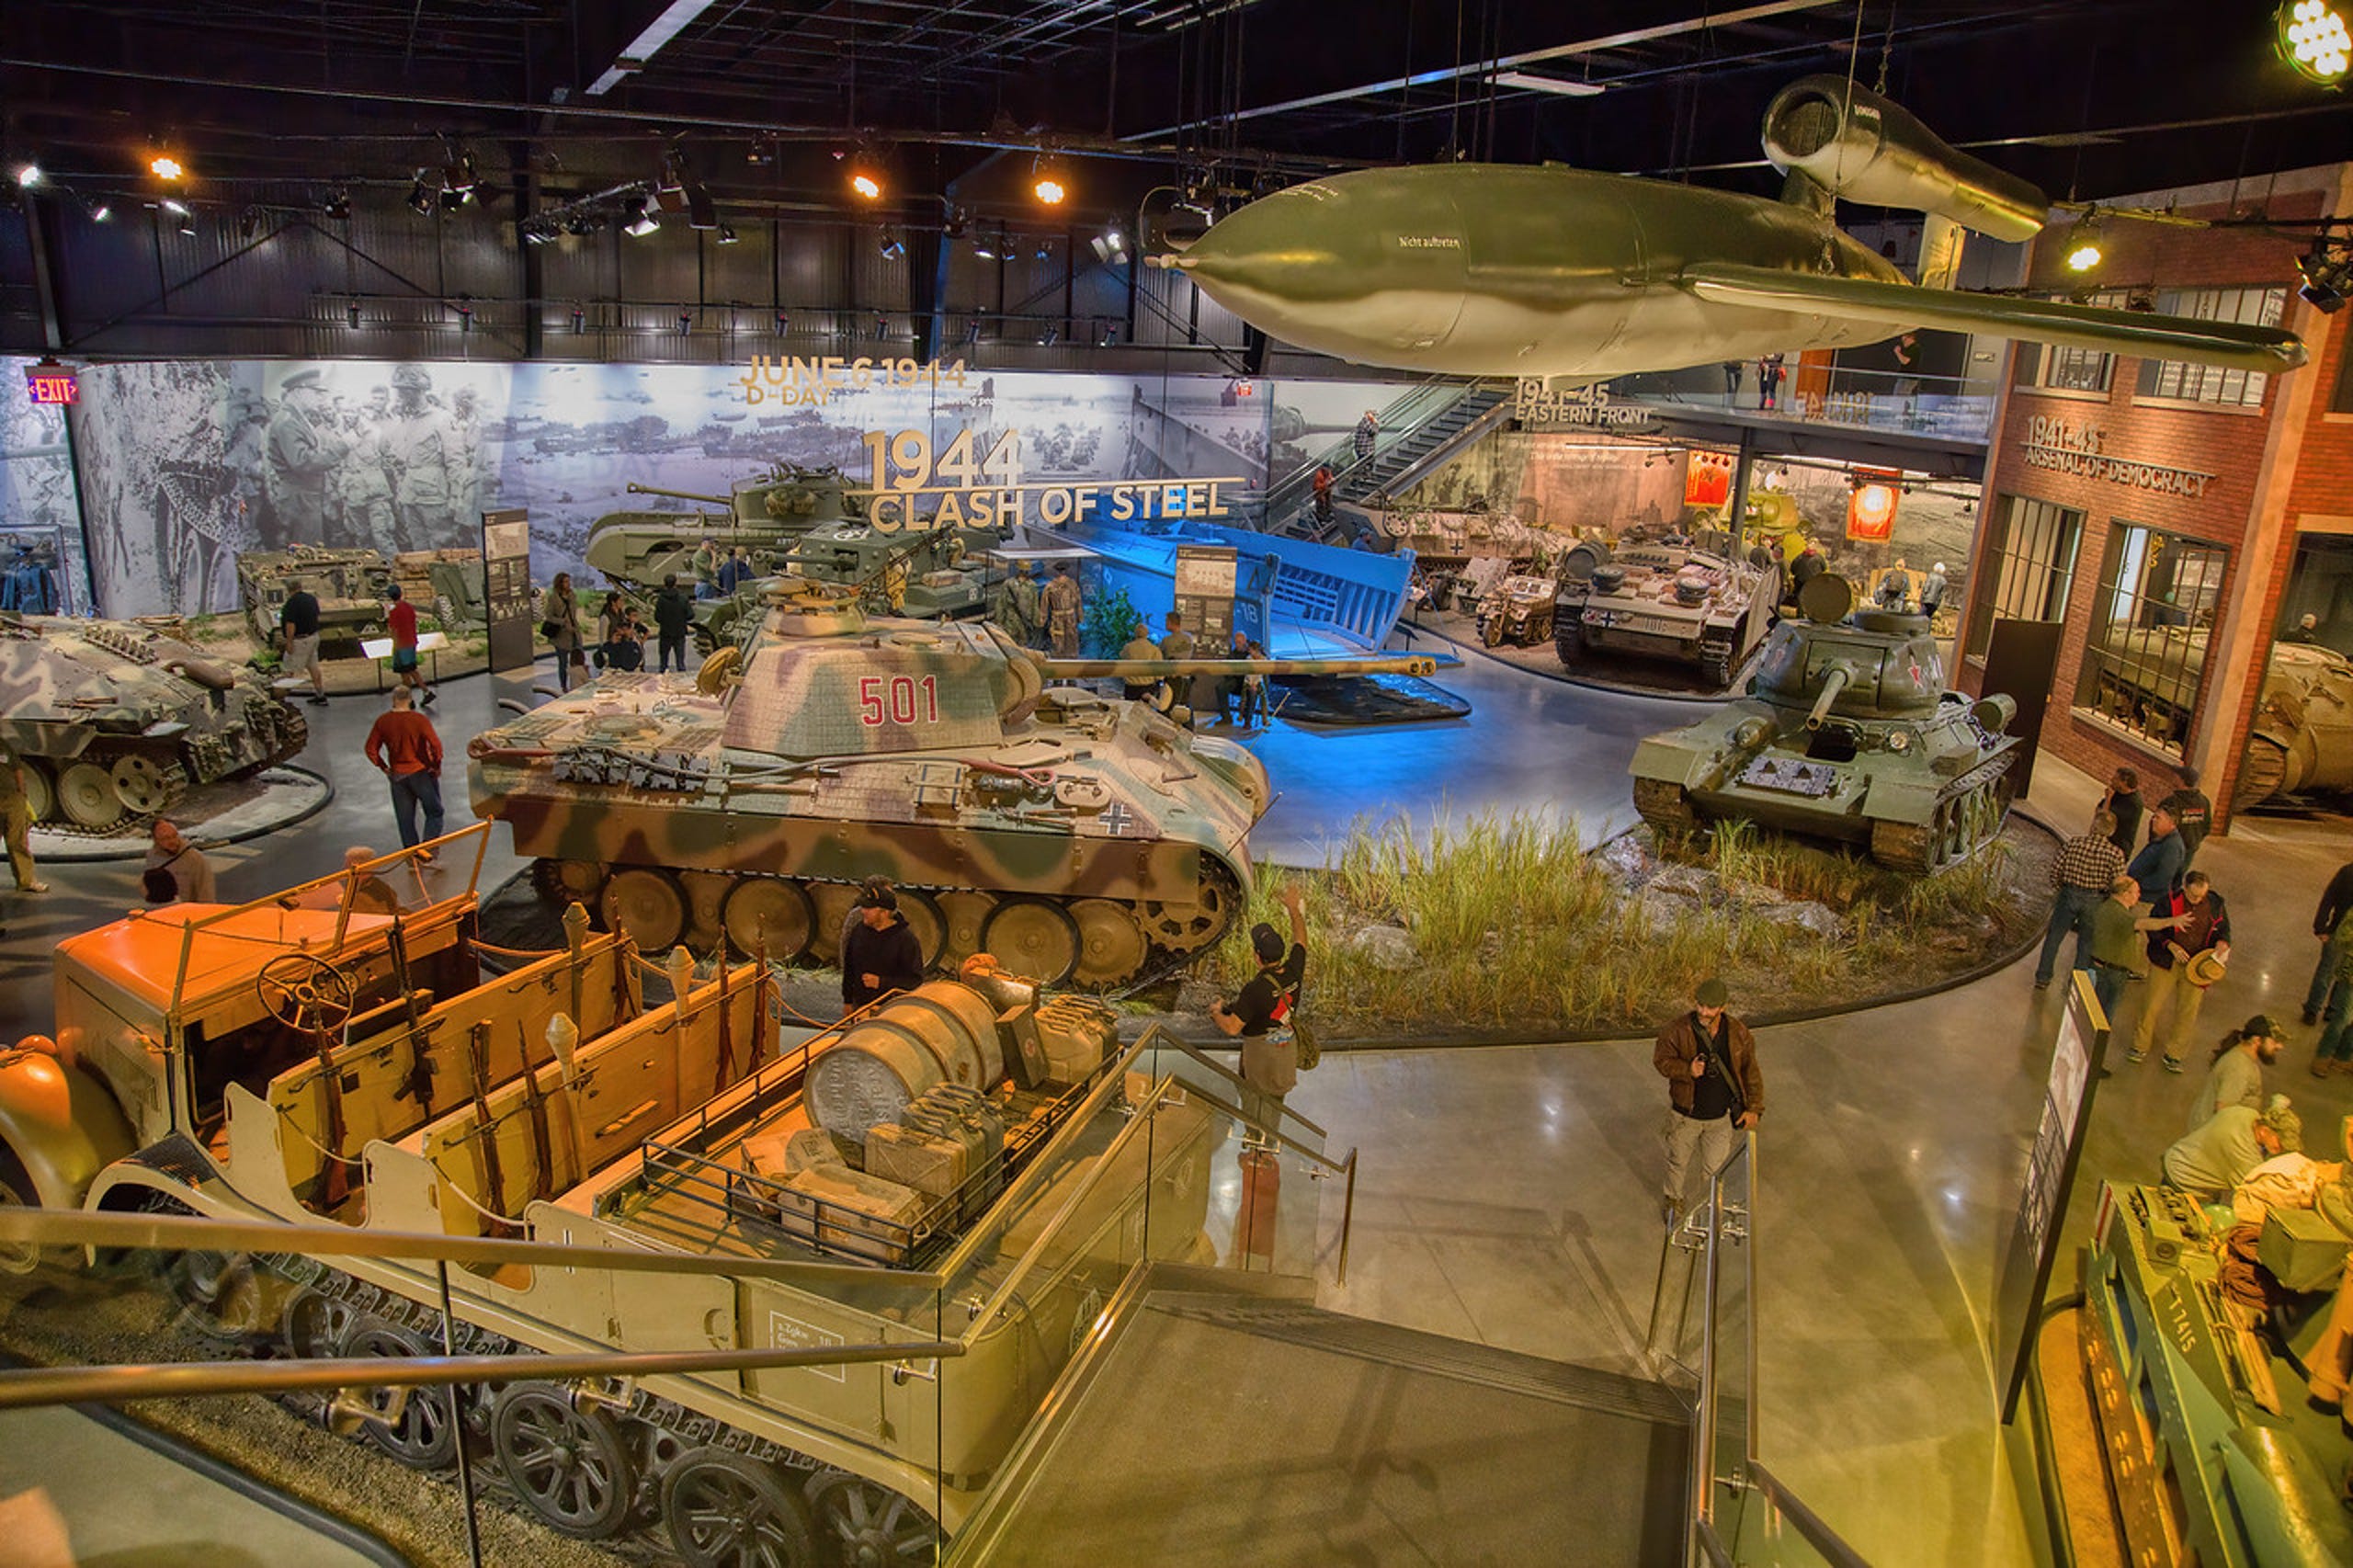 <strong>American Heritage Museum</strong> &bull; Hudson, Massachusetts &bull; Military history museum with extensive collection of vehicles from World War II, as well as exhibits about World War I and other wars.